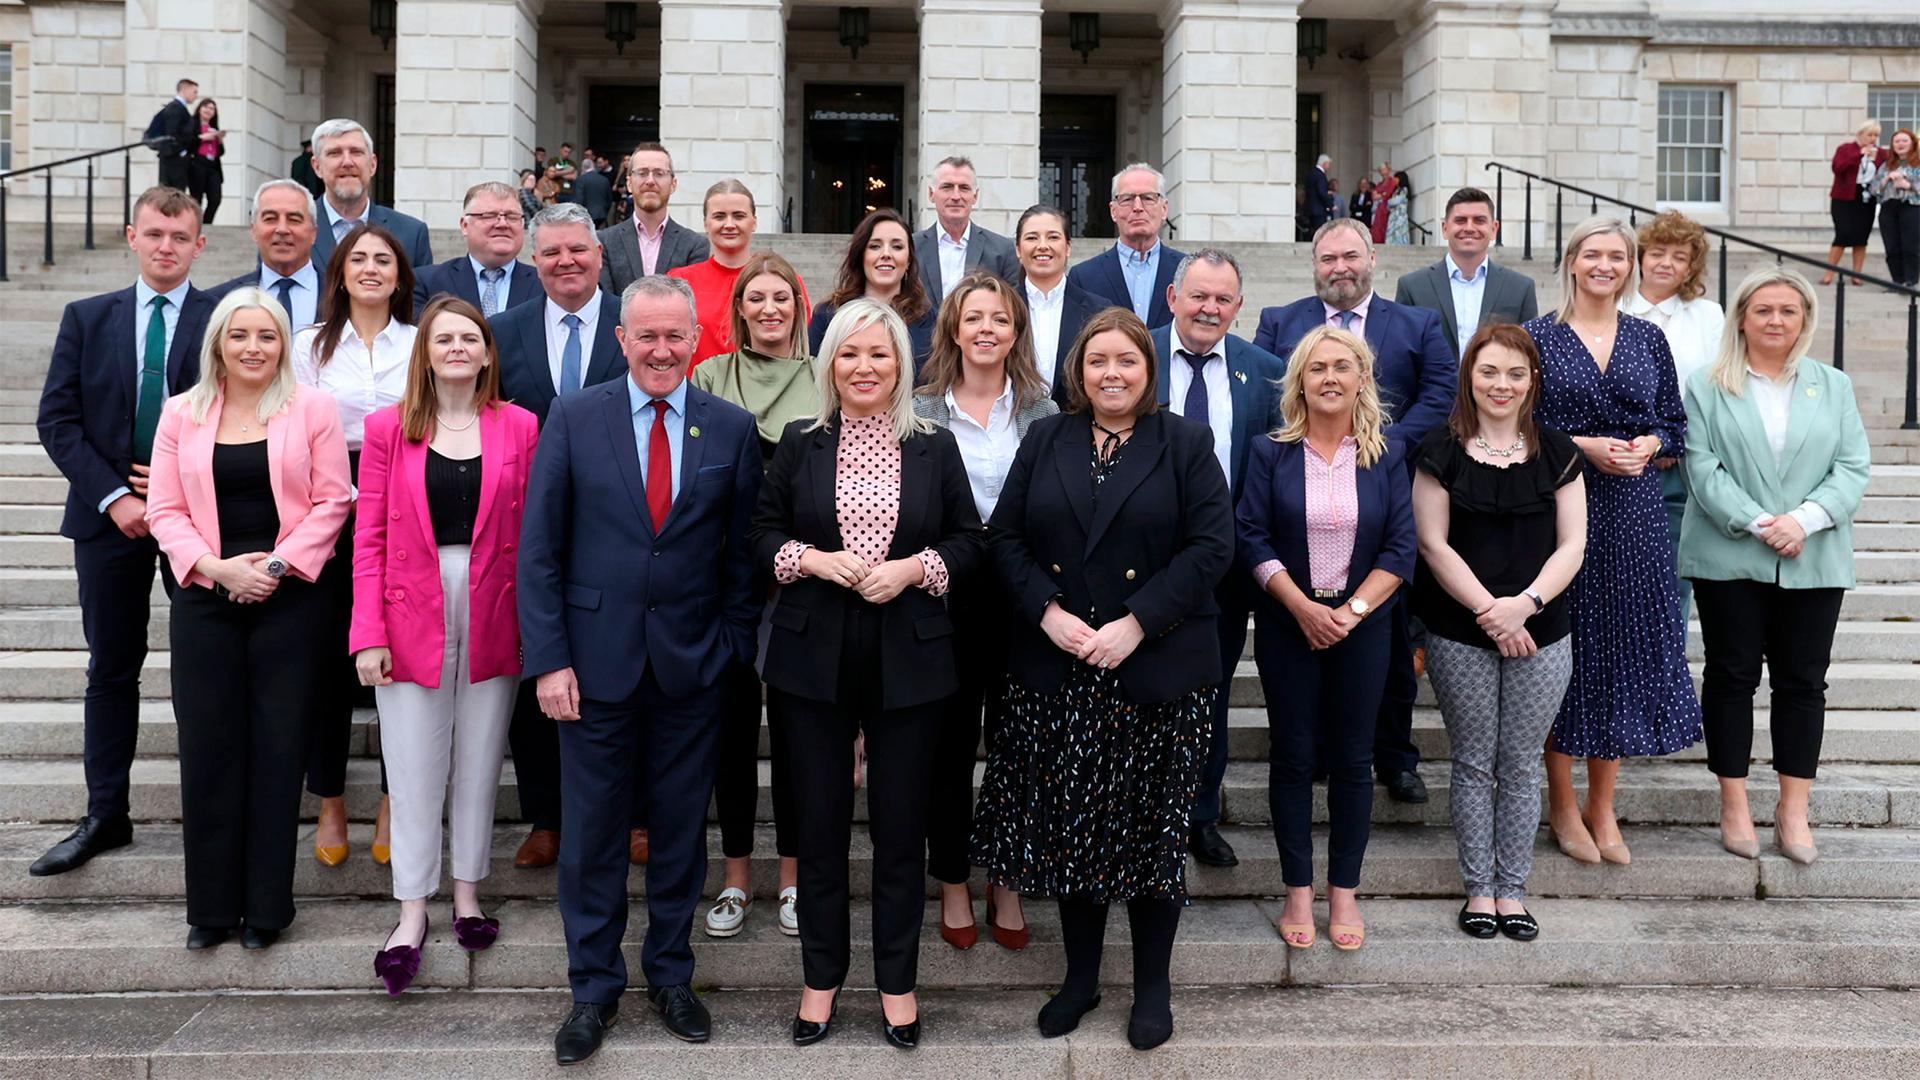 Irish nationalist party Sinn Fein's Michelle O'Neill, center, poses for a family photo with her party's newly elected members of the legislative assembly outside Parliament Buildings at Stormont, Belfast, Northern Ireland